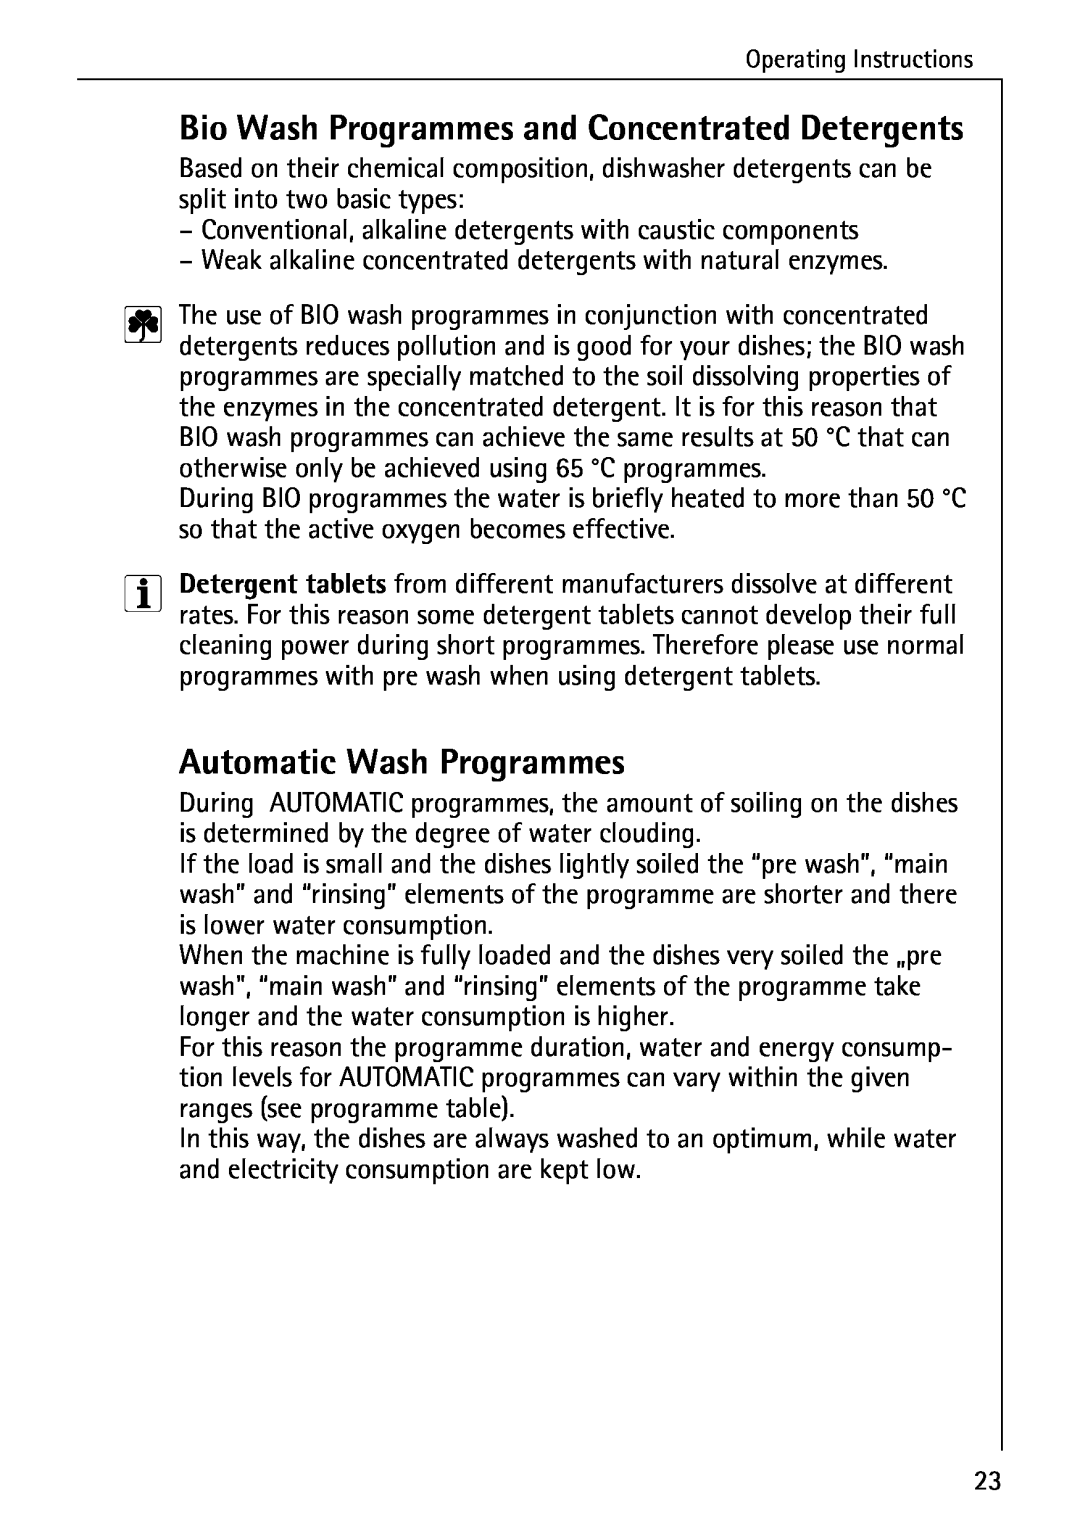 AEG 80800 manual Bio Wash Programmes and Concentrated Detergents, Automatic Wash Programmes 